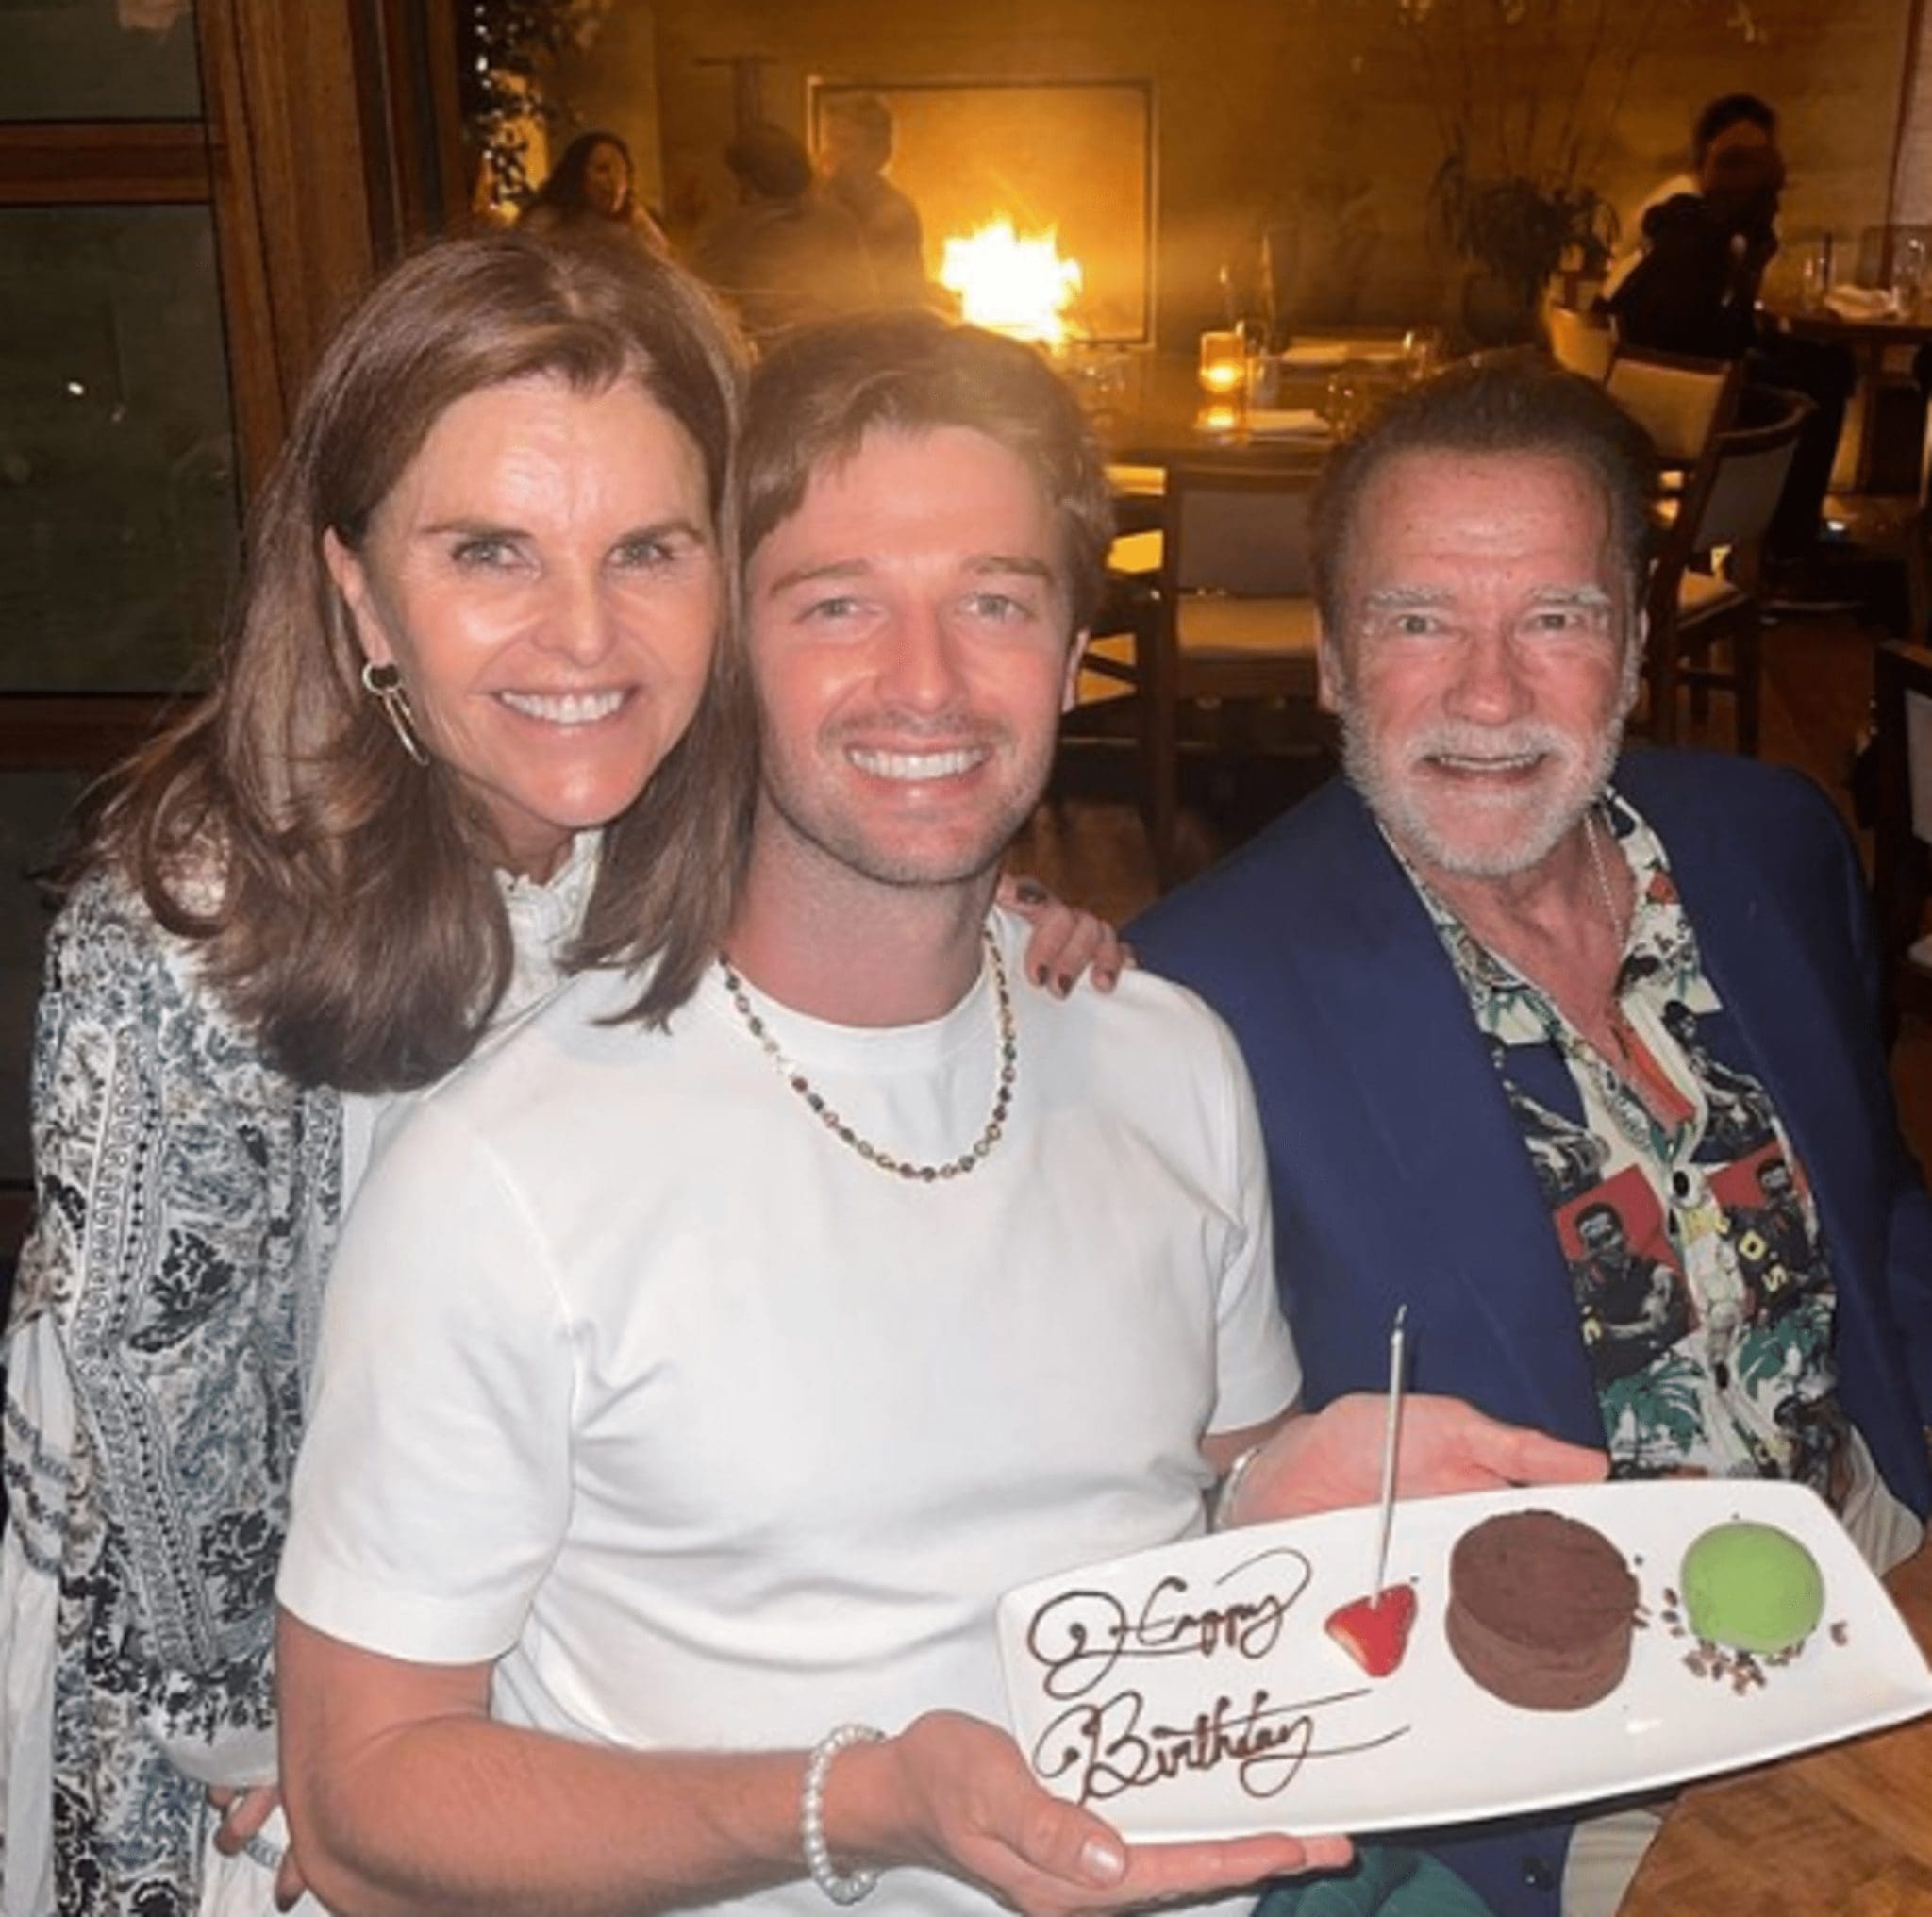 Patrick Schwarzenegger's Birthday Party Honored By Parent Exes Arnold And Maria Shriver